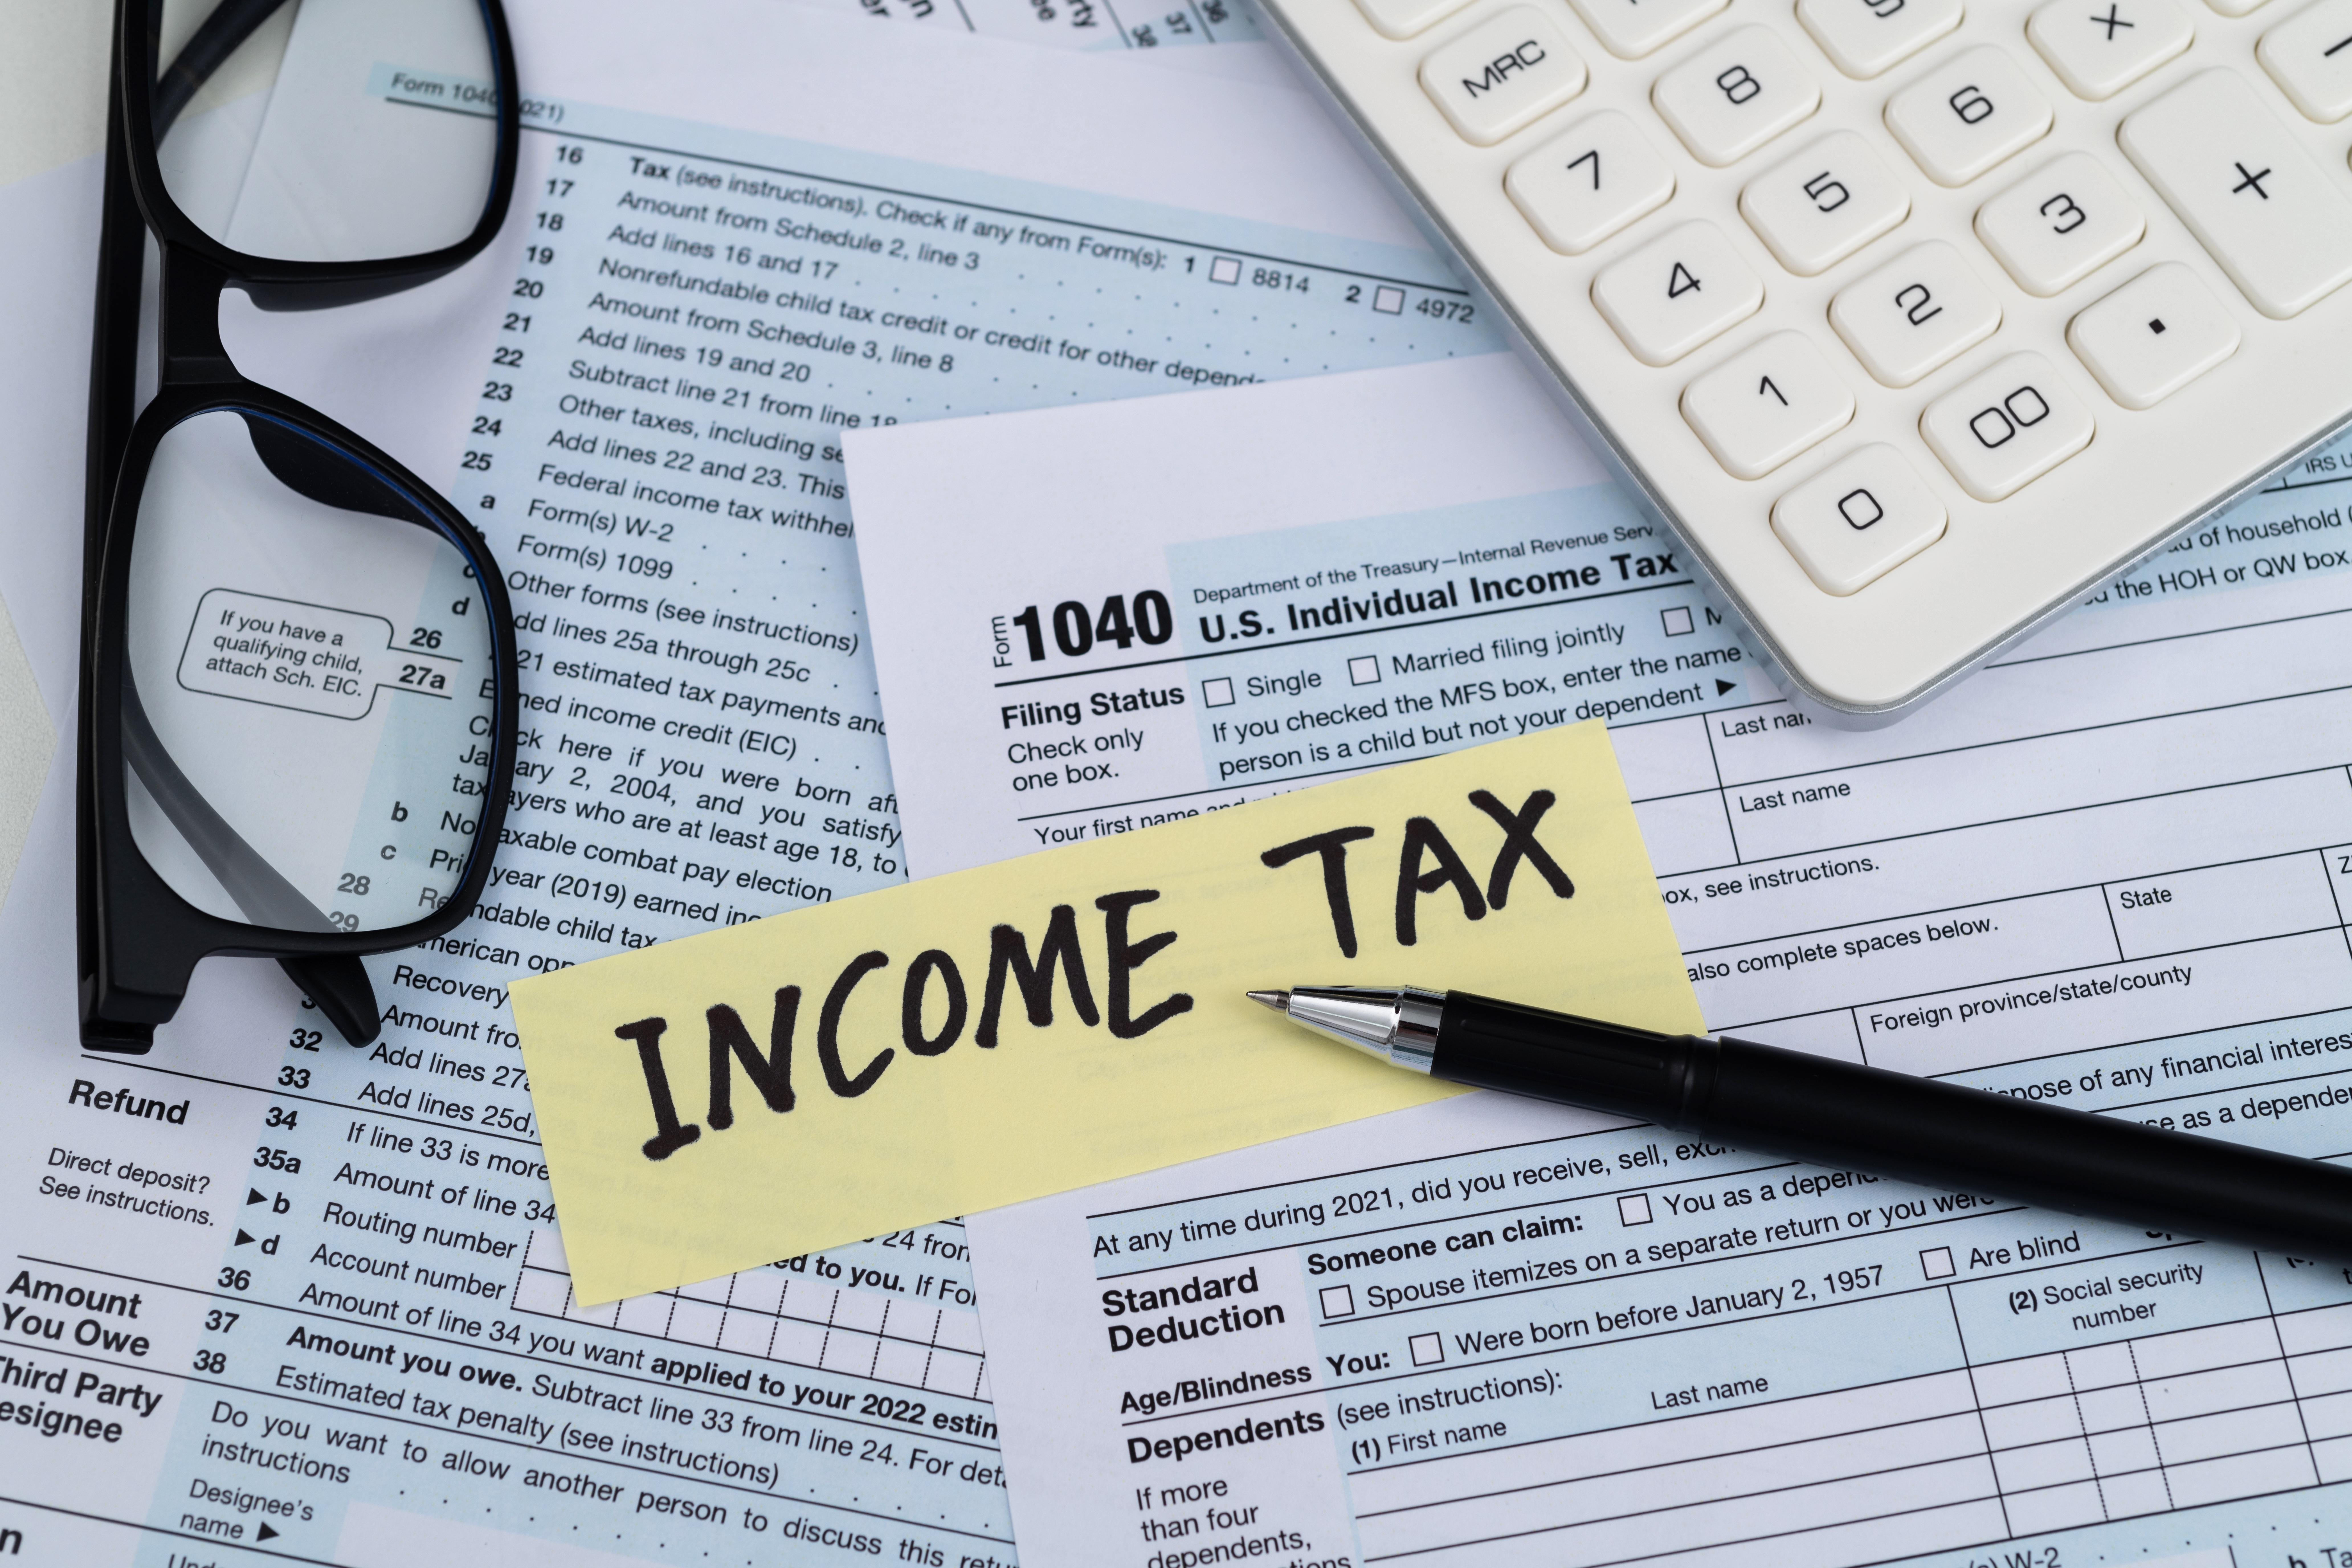 How to File Income Tax Return of Deceased Person in India